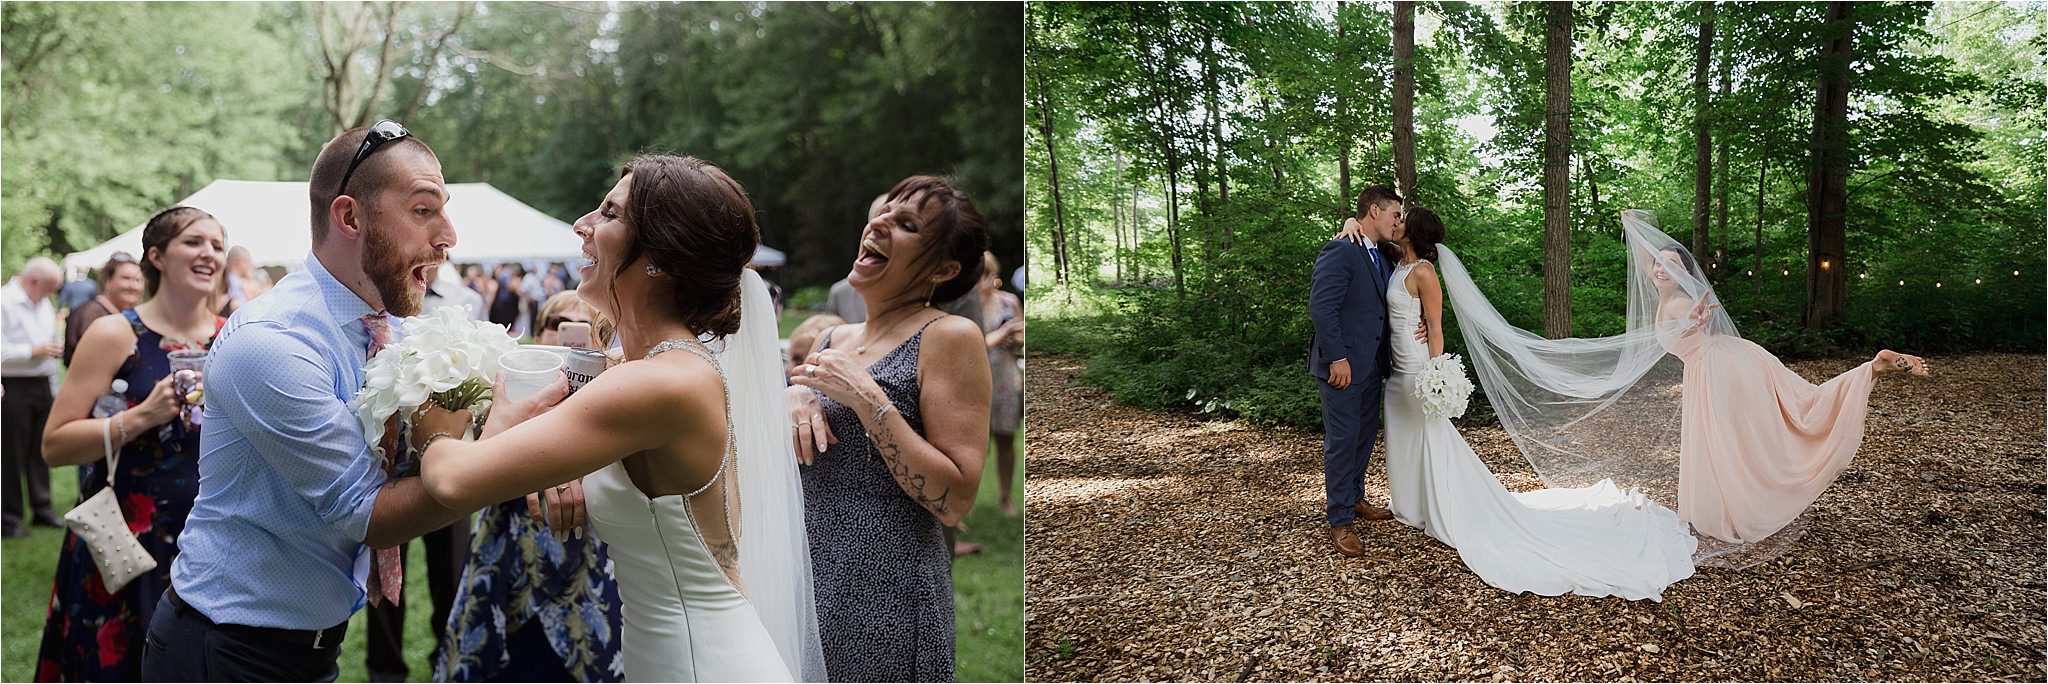 Sonia V Photography, The Clearing ceremony wedding venue, fun moments with the guests